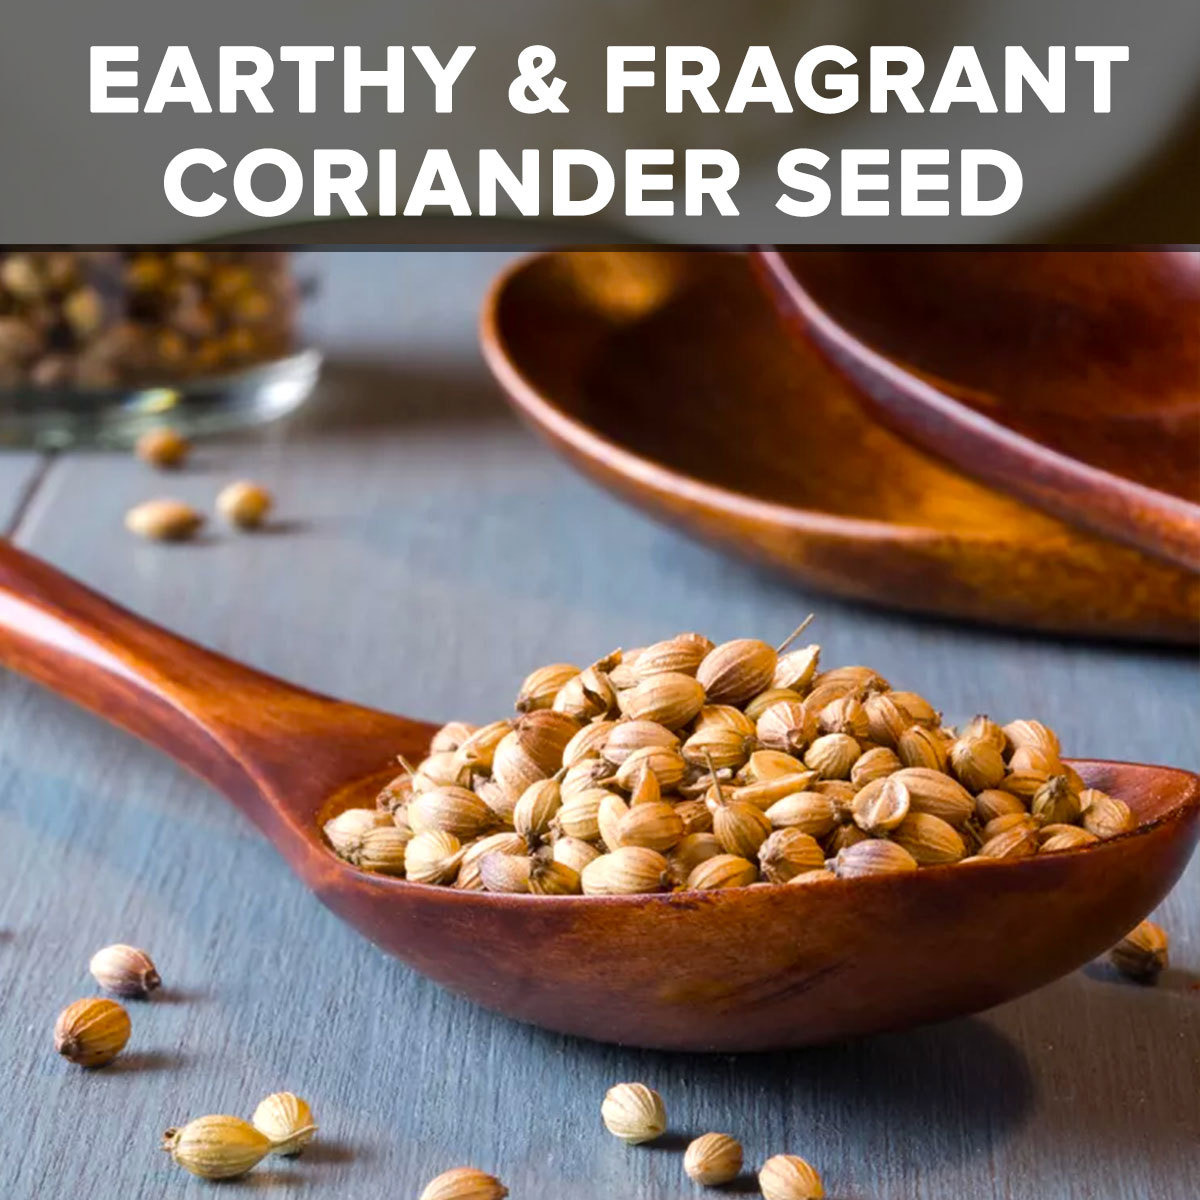 El The Cook Coriander Seeds | Lab Tested for Purity | Resealable Bag, Non-GMO Verified Project Approved, 100% Raw from India | 3.5 oz (100g) (Flavor: Coriander Seed)